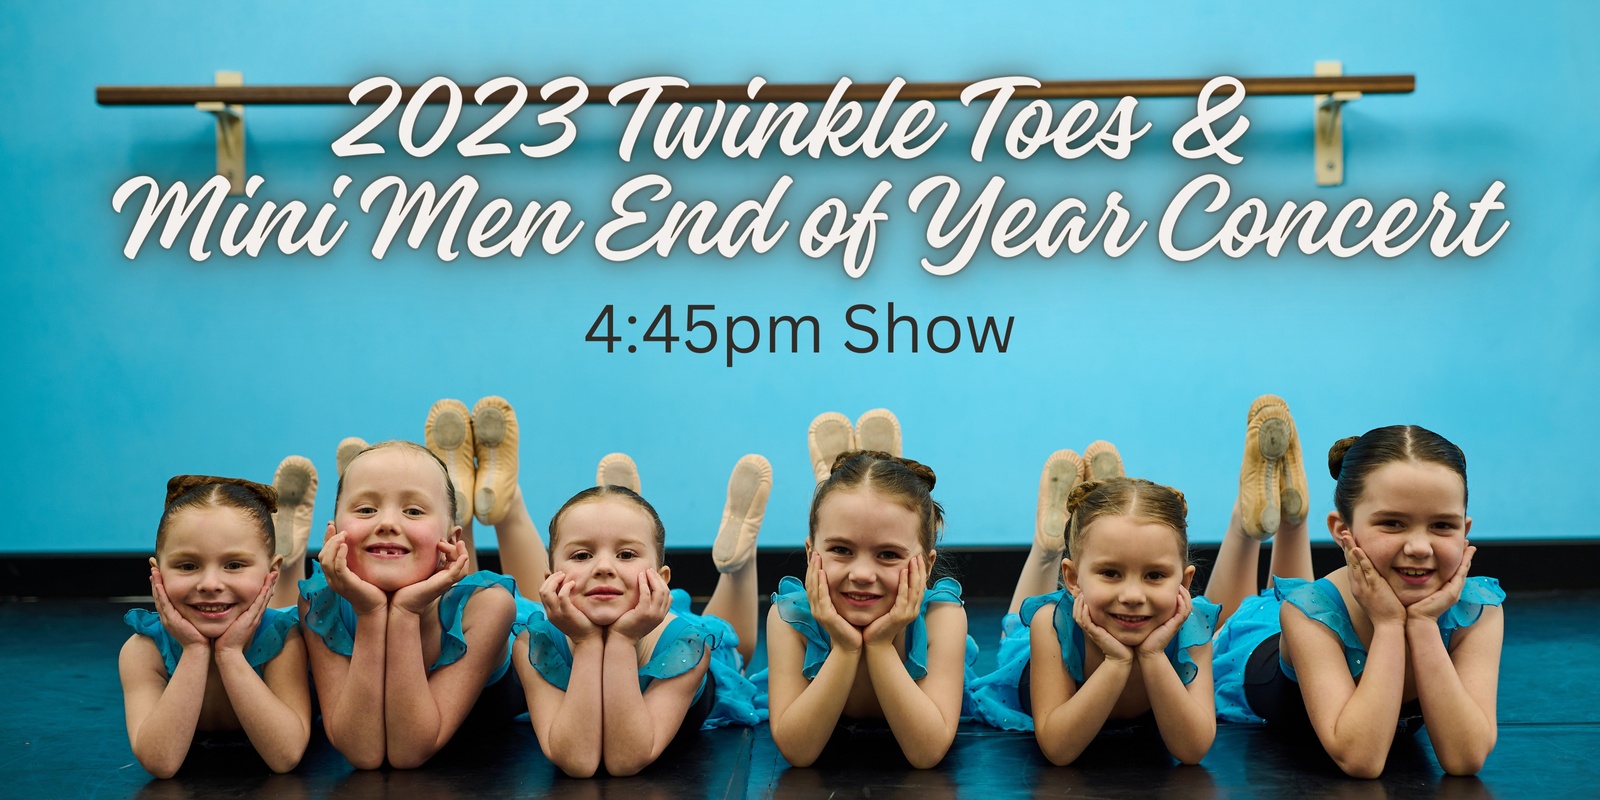 Banner image for 2023 Twinkle Toes & Mini Men End of Year Concert - 4:45pm Show